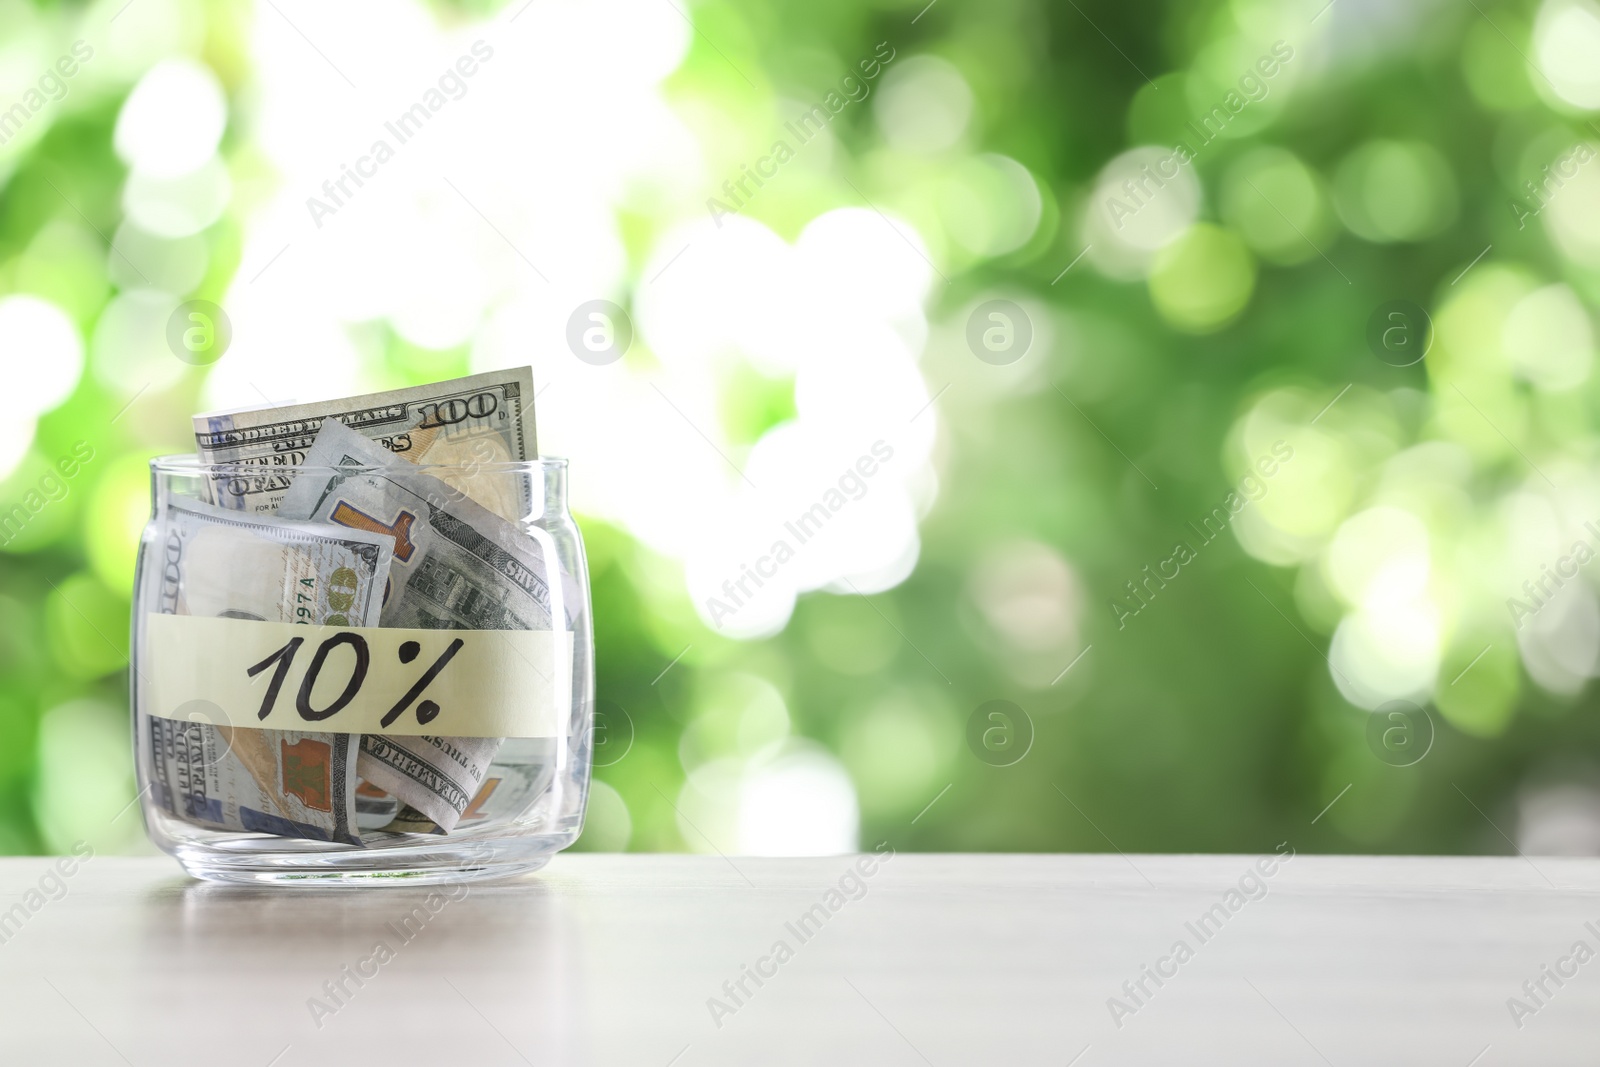 Photo of Glass jar with money and label 10 PERCENT on table against blurred background. Space for text